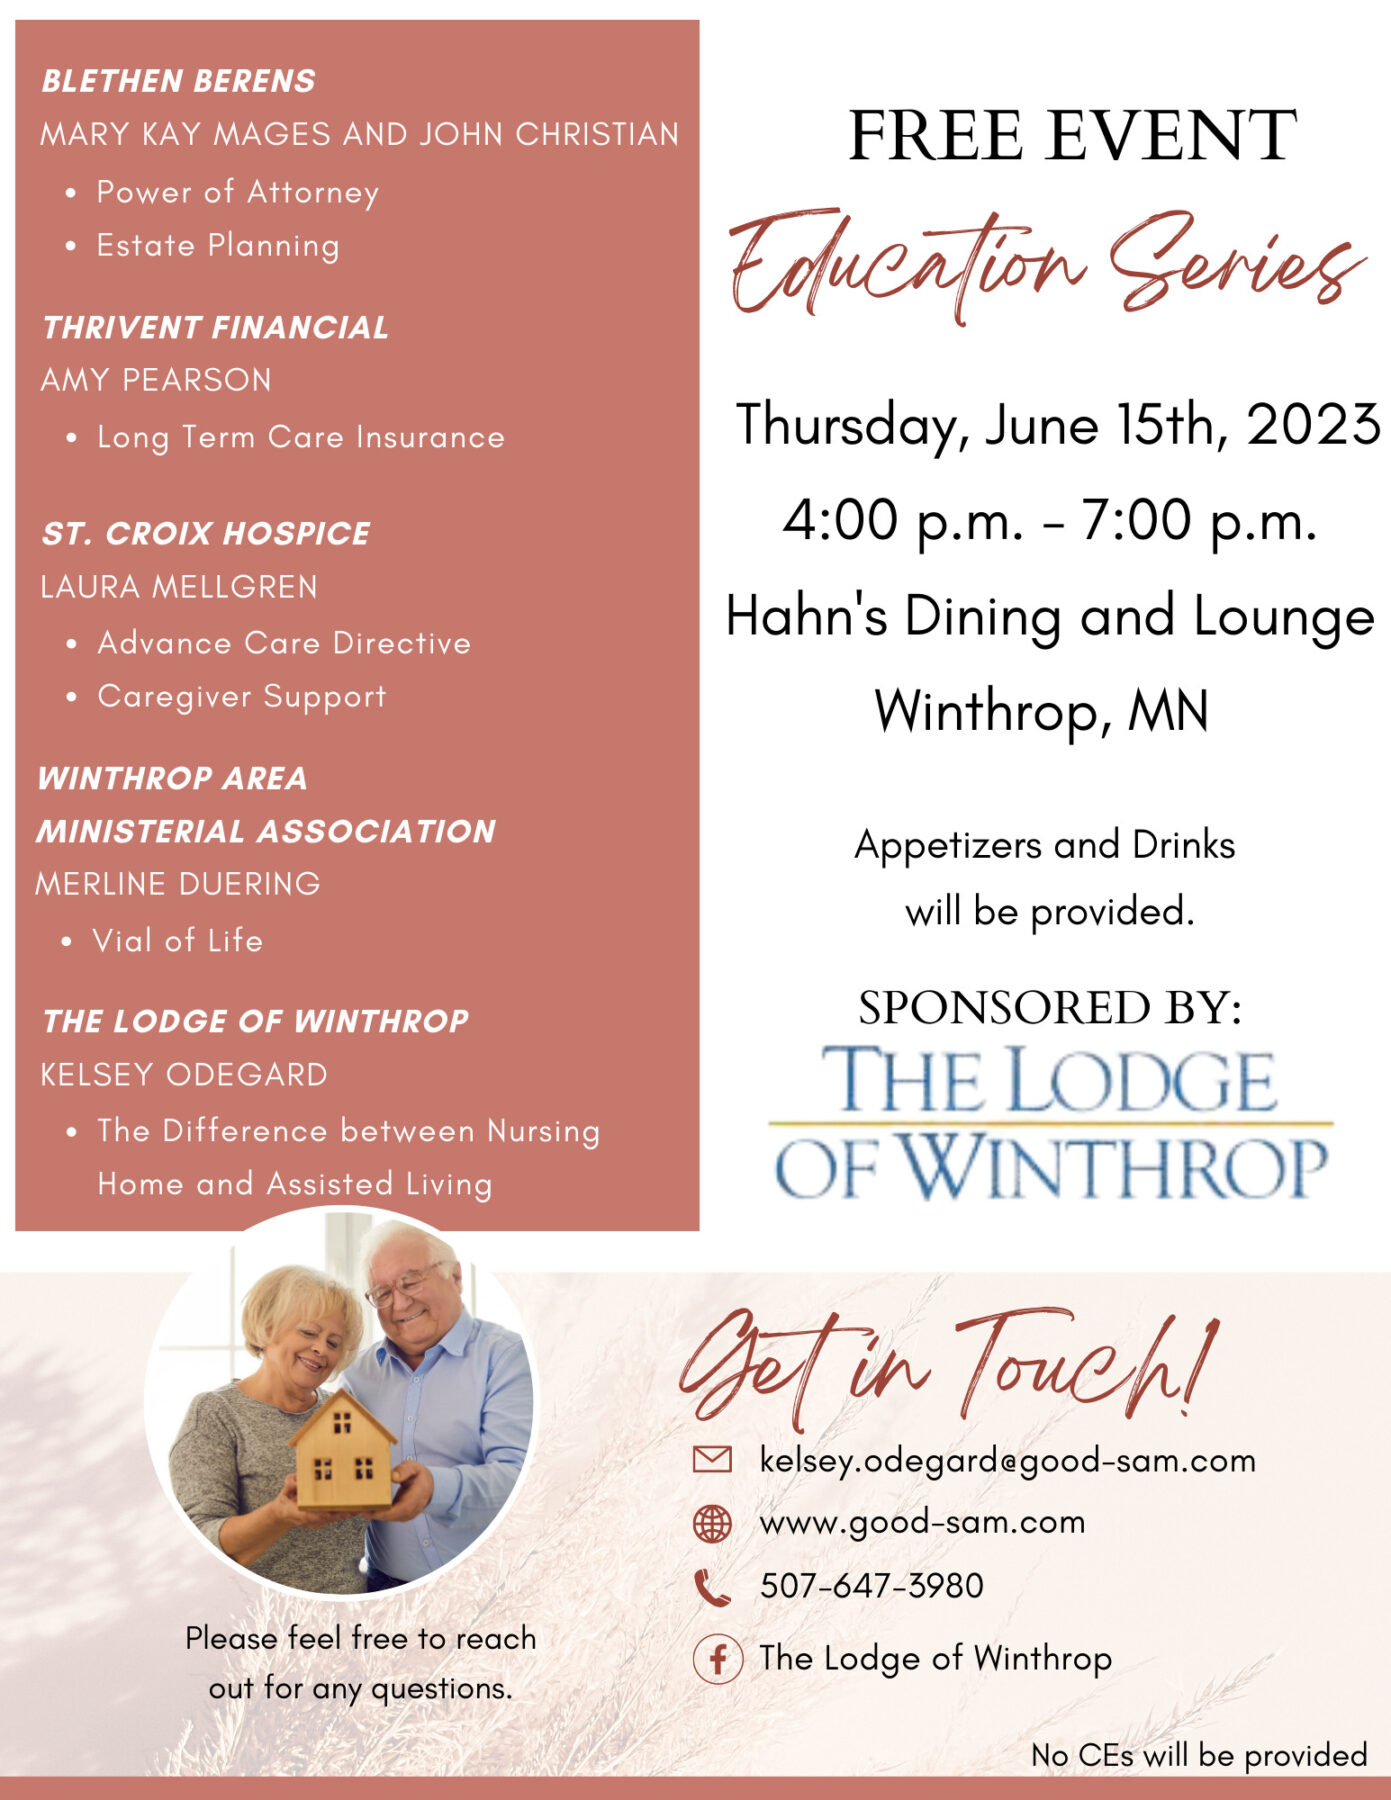 The Lodge of Winthrop Education Series